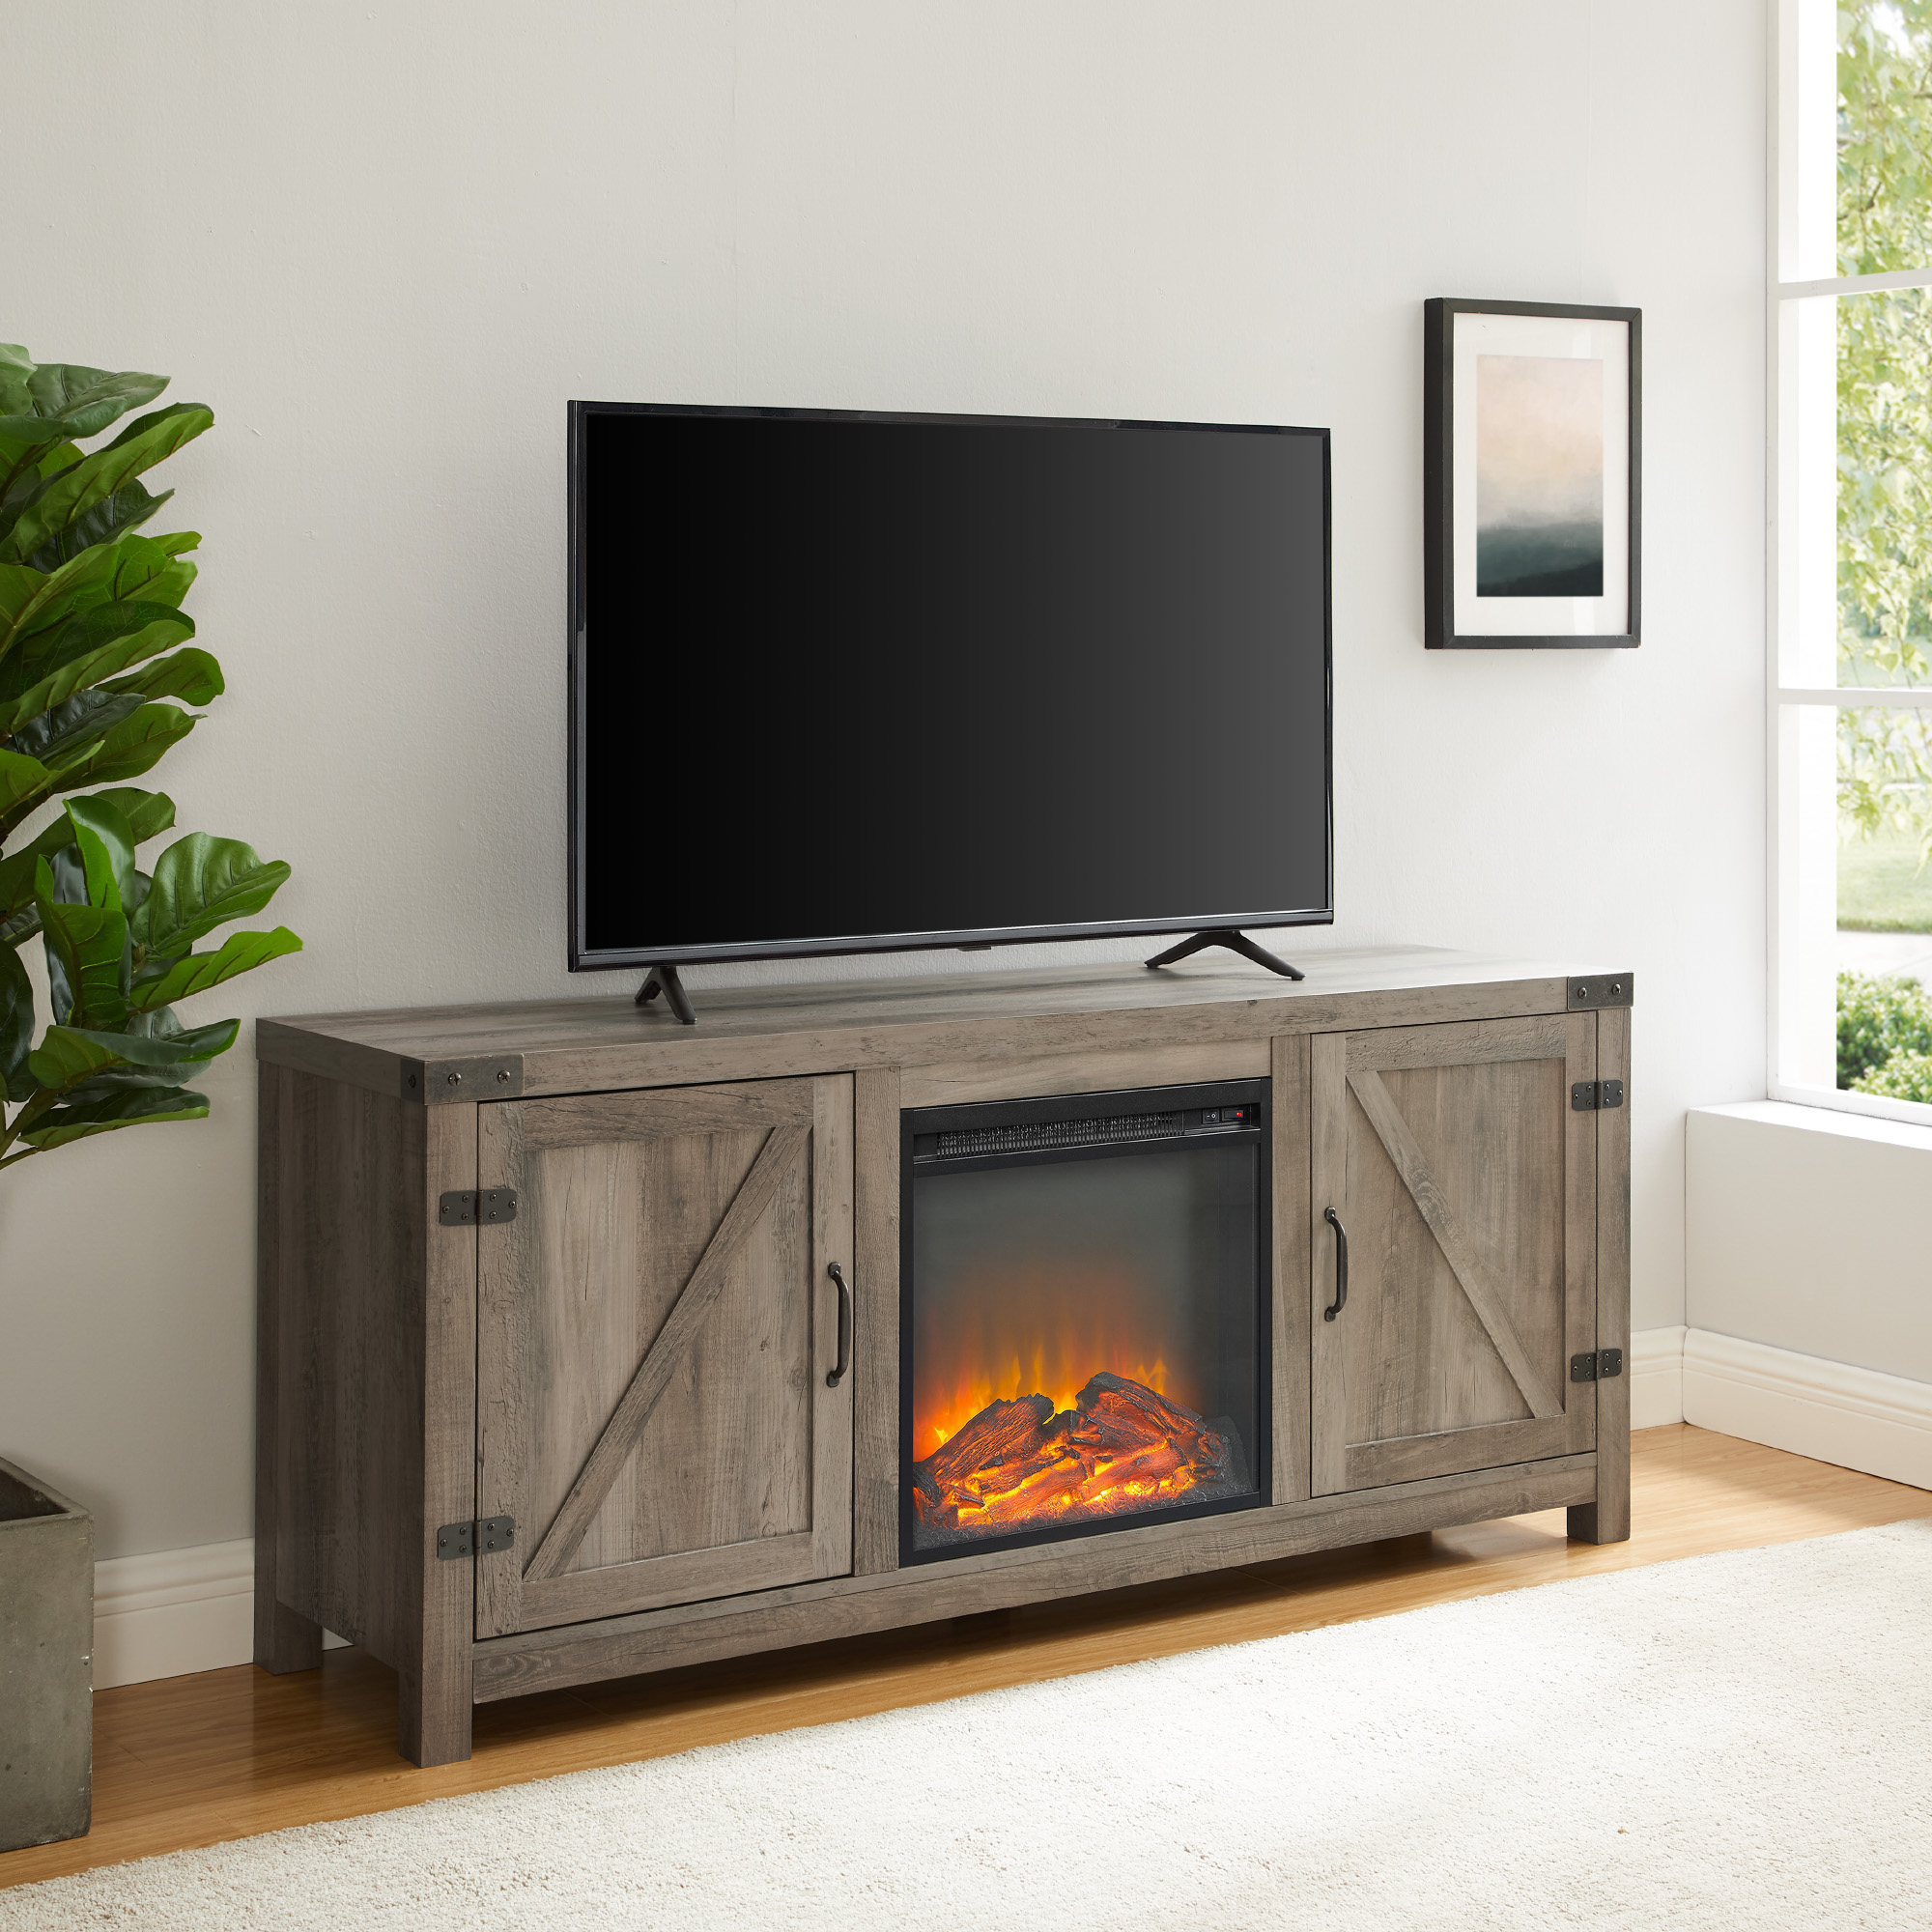 Walker Edison Modern Farmhouse Fireplace TV Stand for TVs up to 65", Grey Wash - image 1 of 11